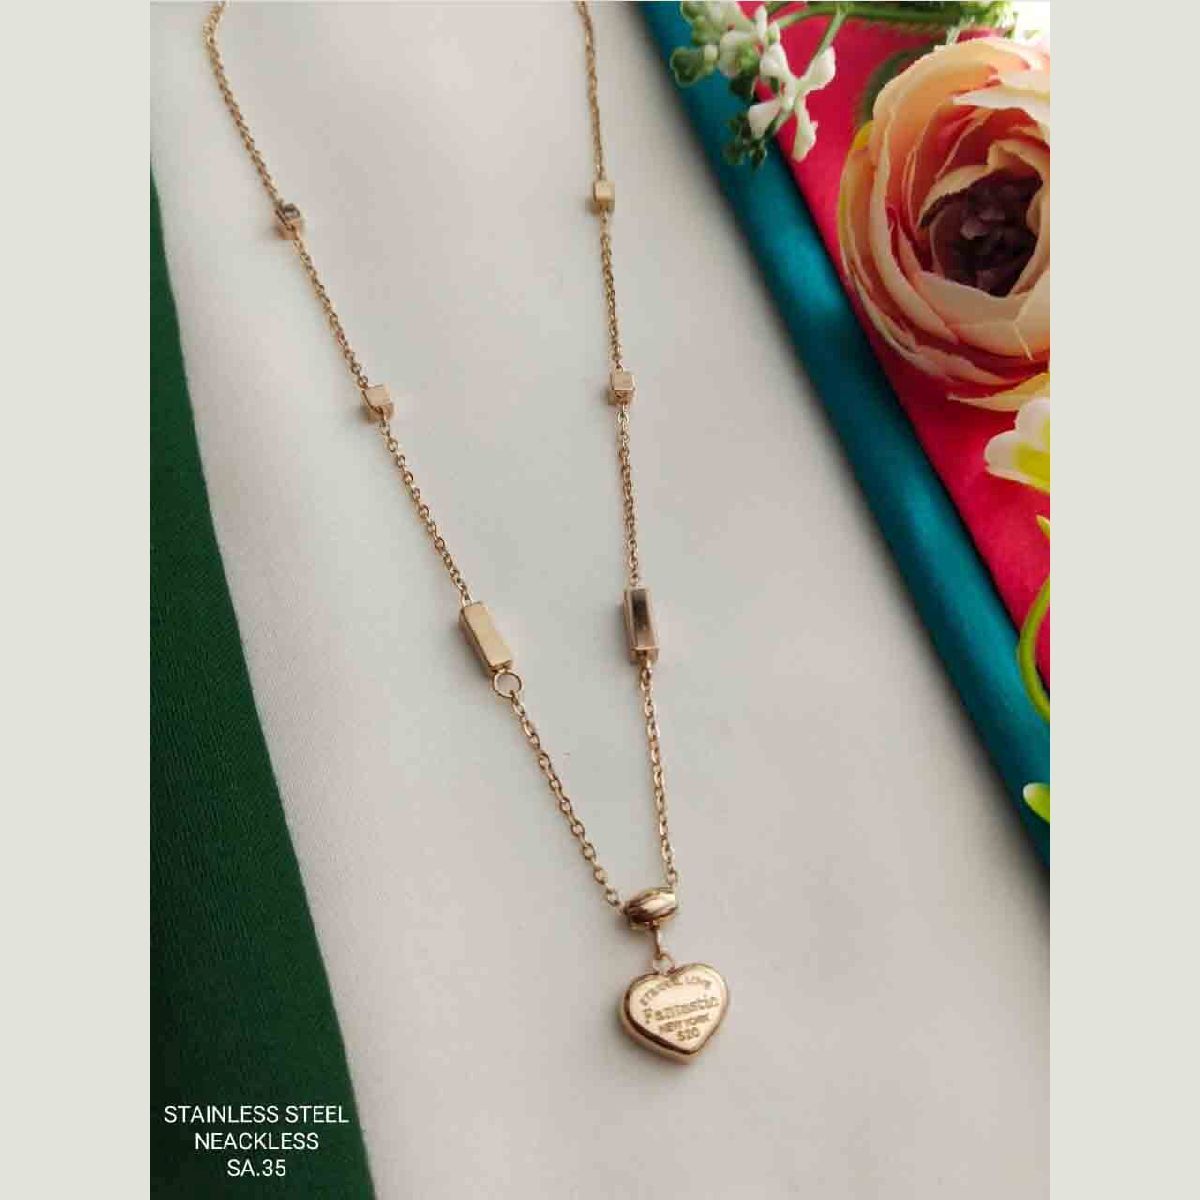 Heart Rose Gold Stainless Steel Necklace Pendant Chain Women